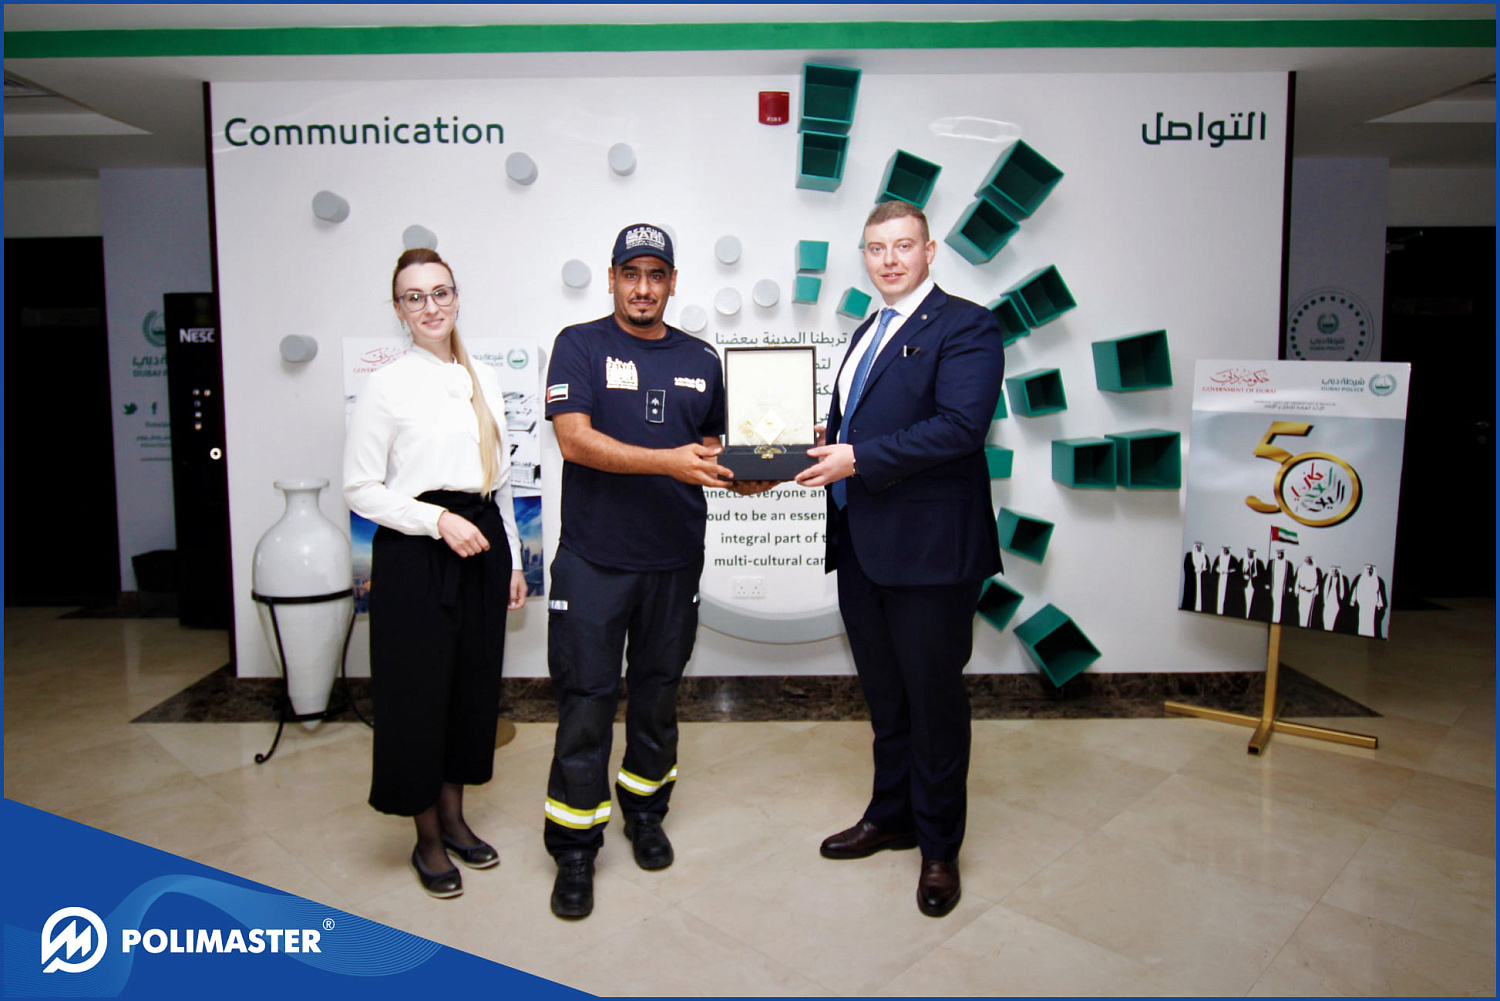 POLIMASTER is happy to have delivered the PM6100 Mobile Detection System (MDS) to the Dubai Police Transport and Rescue Department